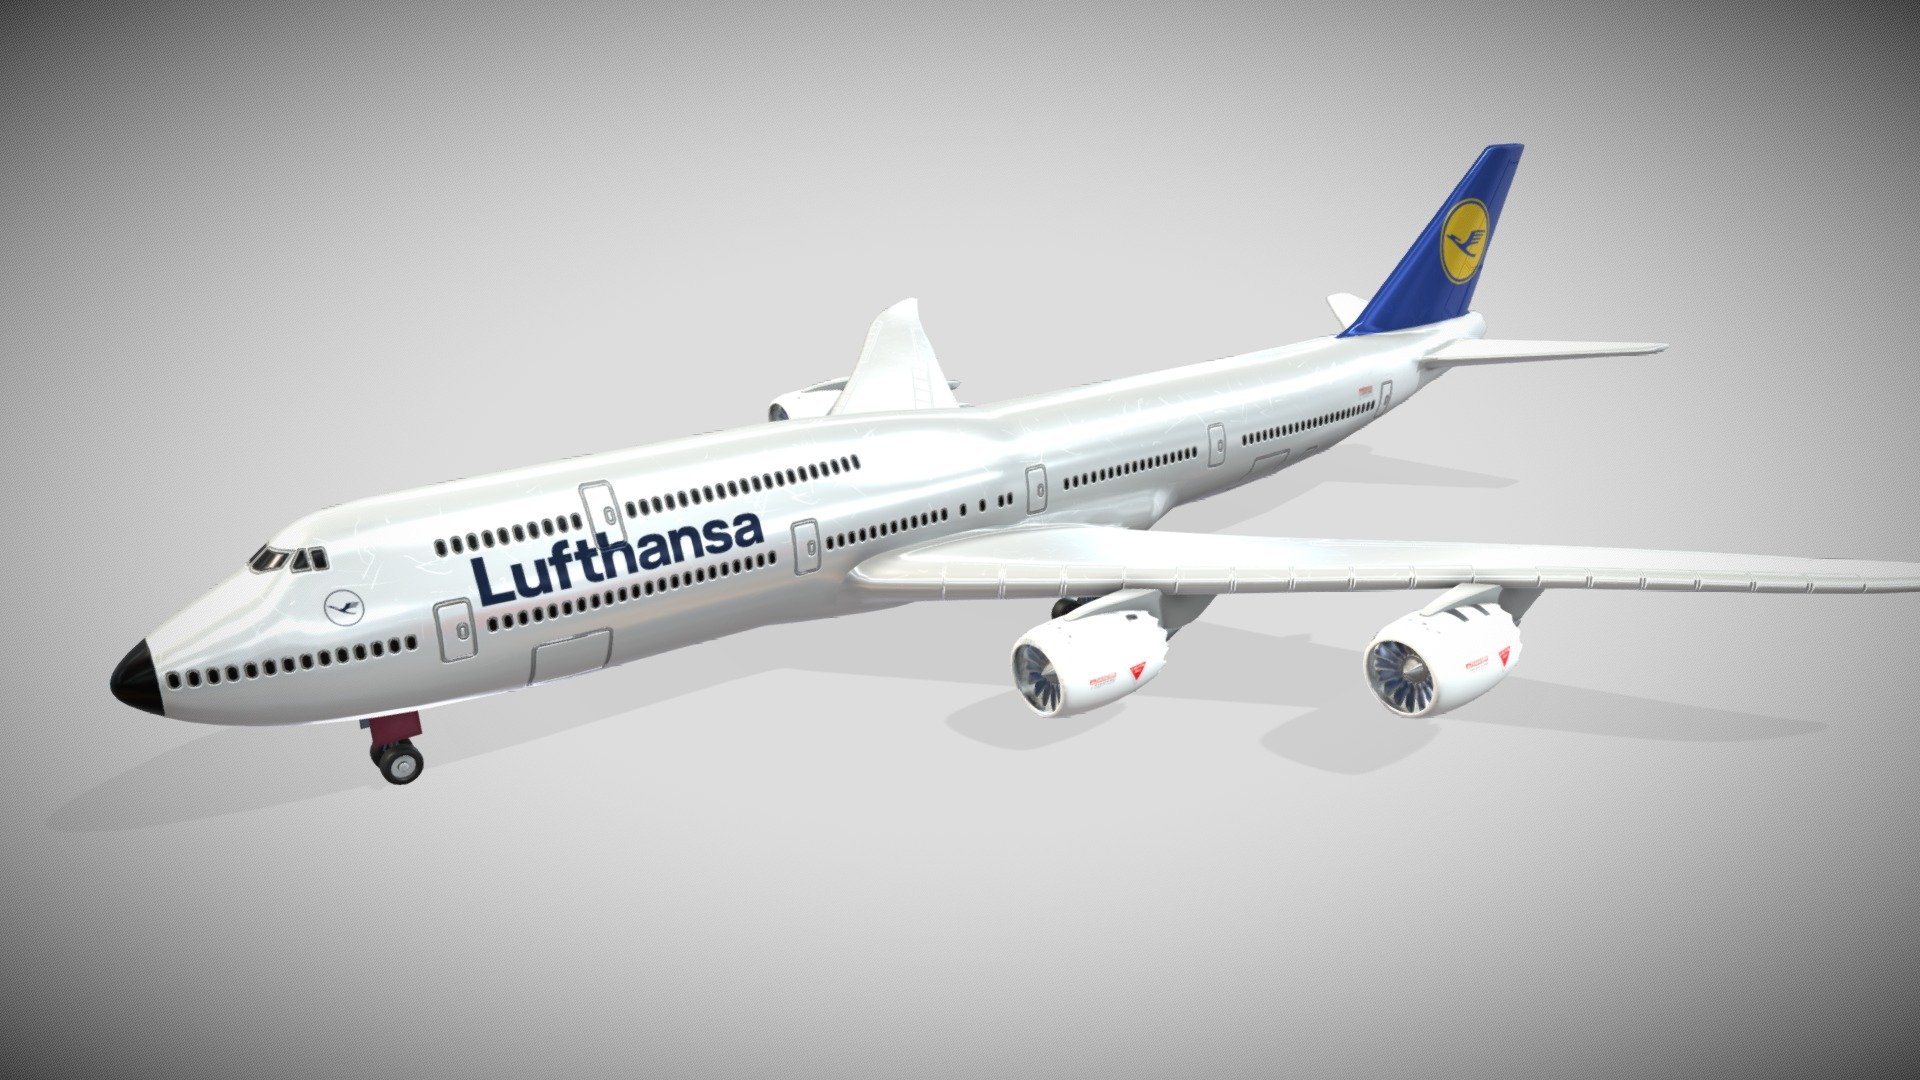 2 Material PBR Metalness 4k (png)

Trolley is Separate Object - Boeing 747 Lufthansa - Buy Royalty Free 3D model by Francesco Coldesina (@topfrank2013) 3d model